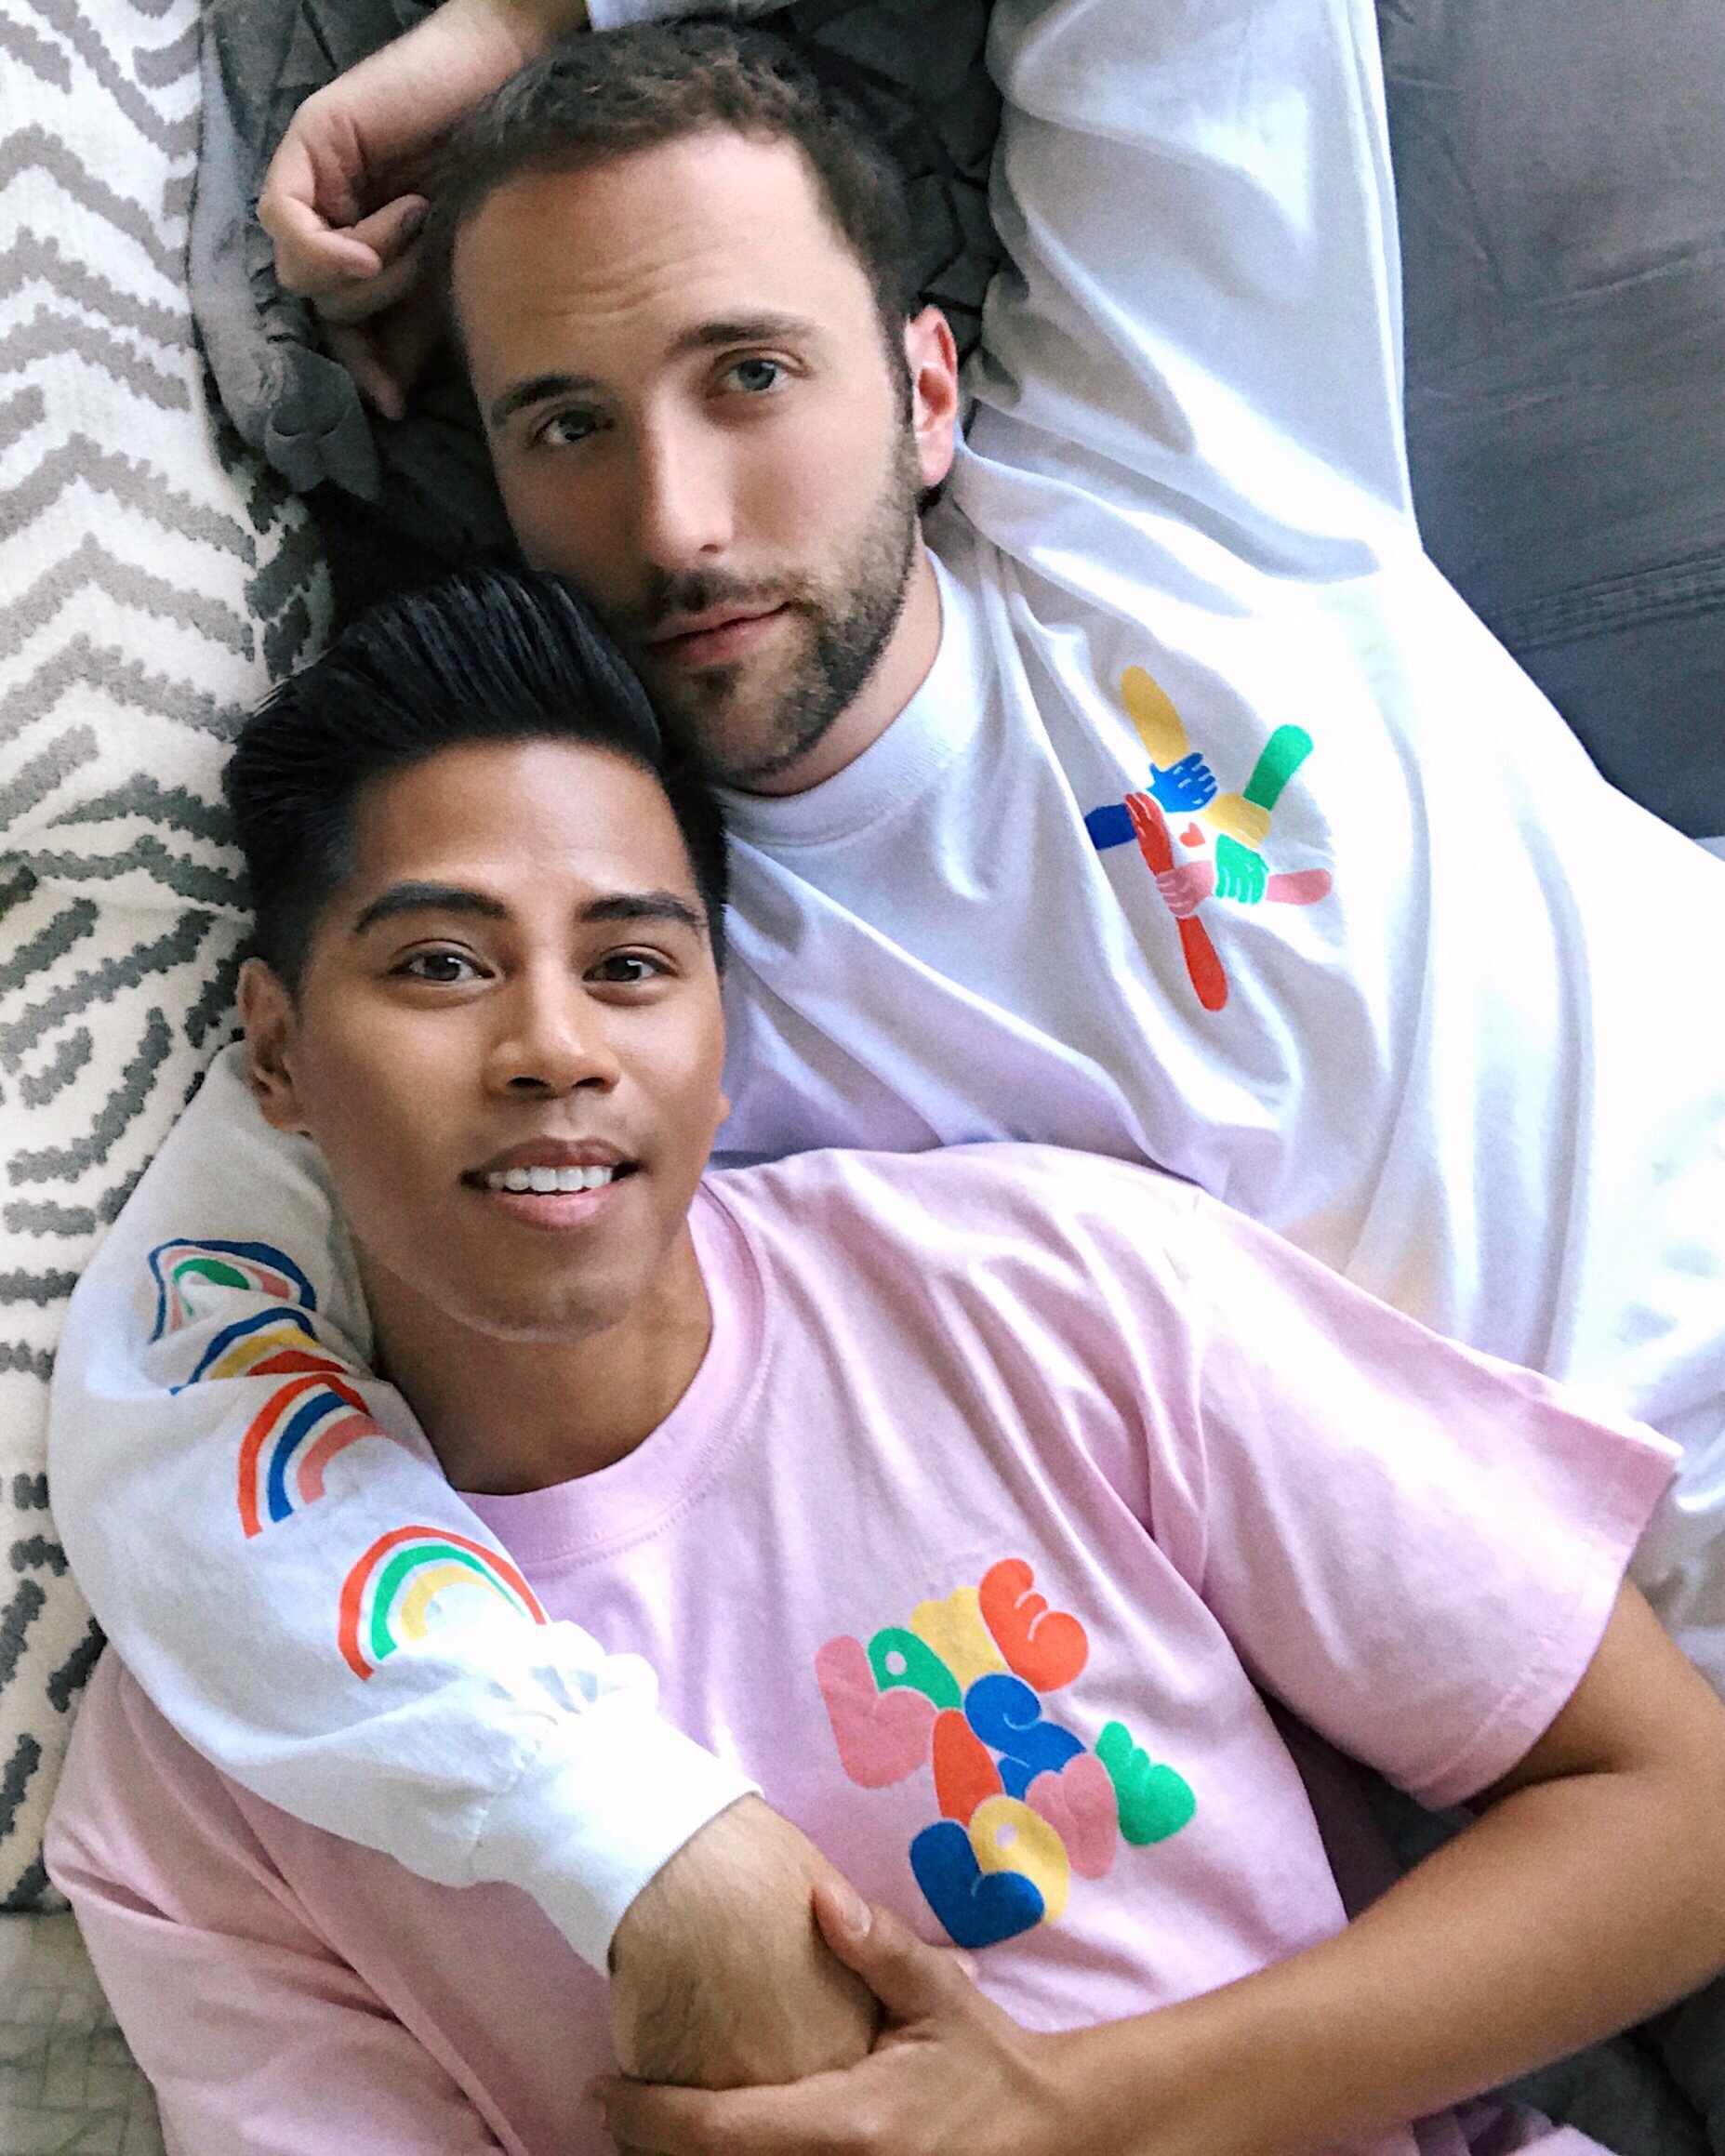 Urban Outfitters Pride collection gay couple pride